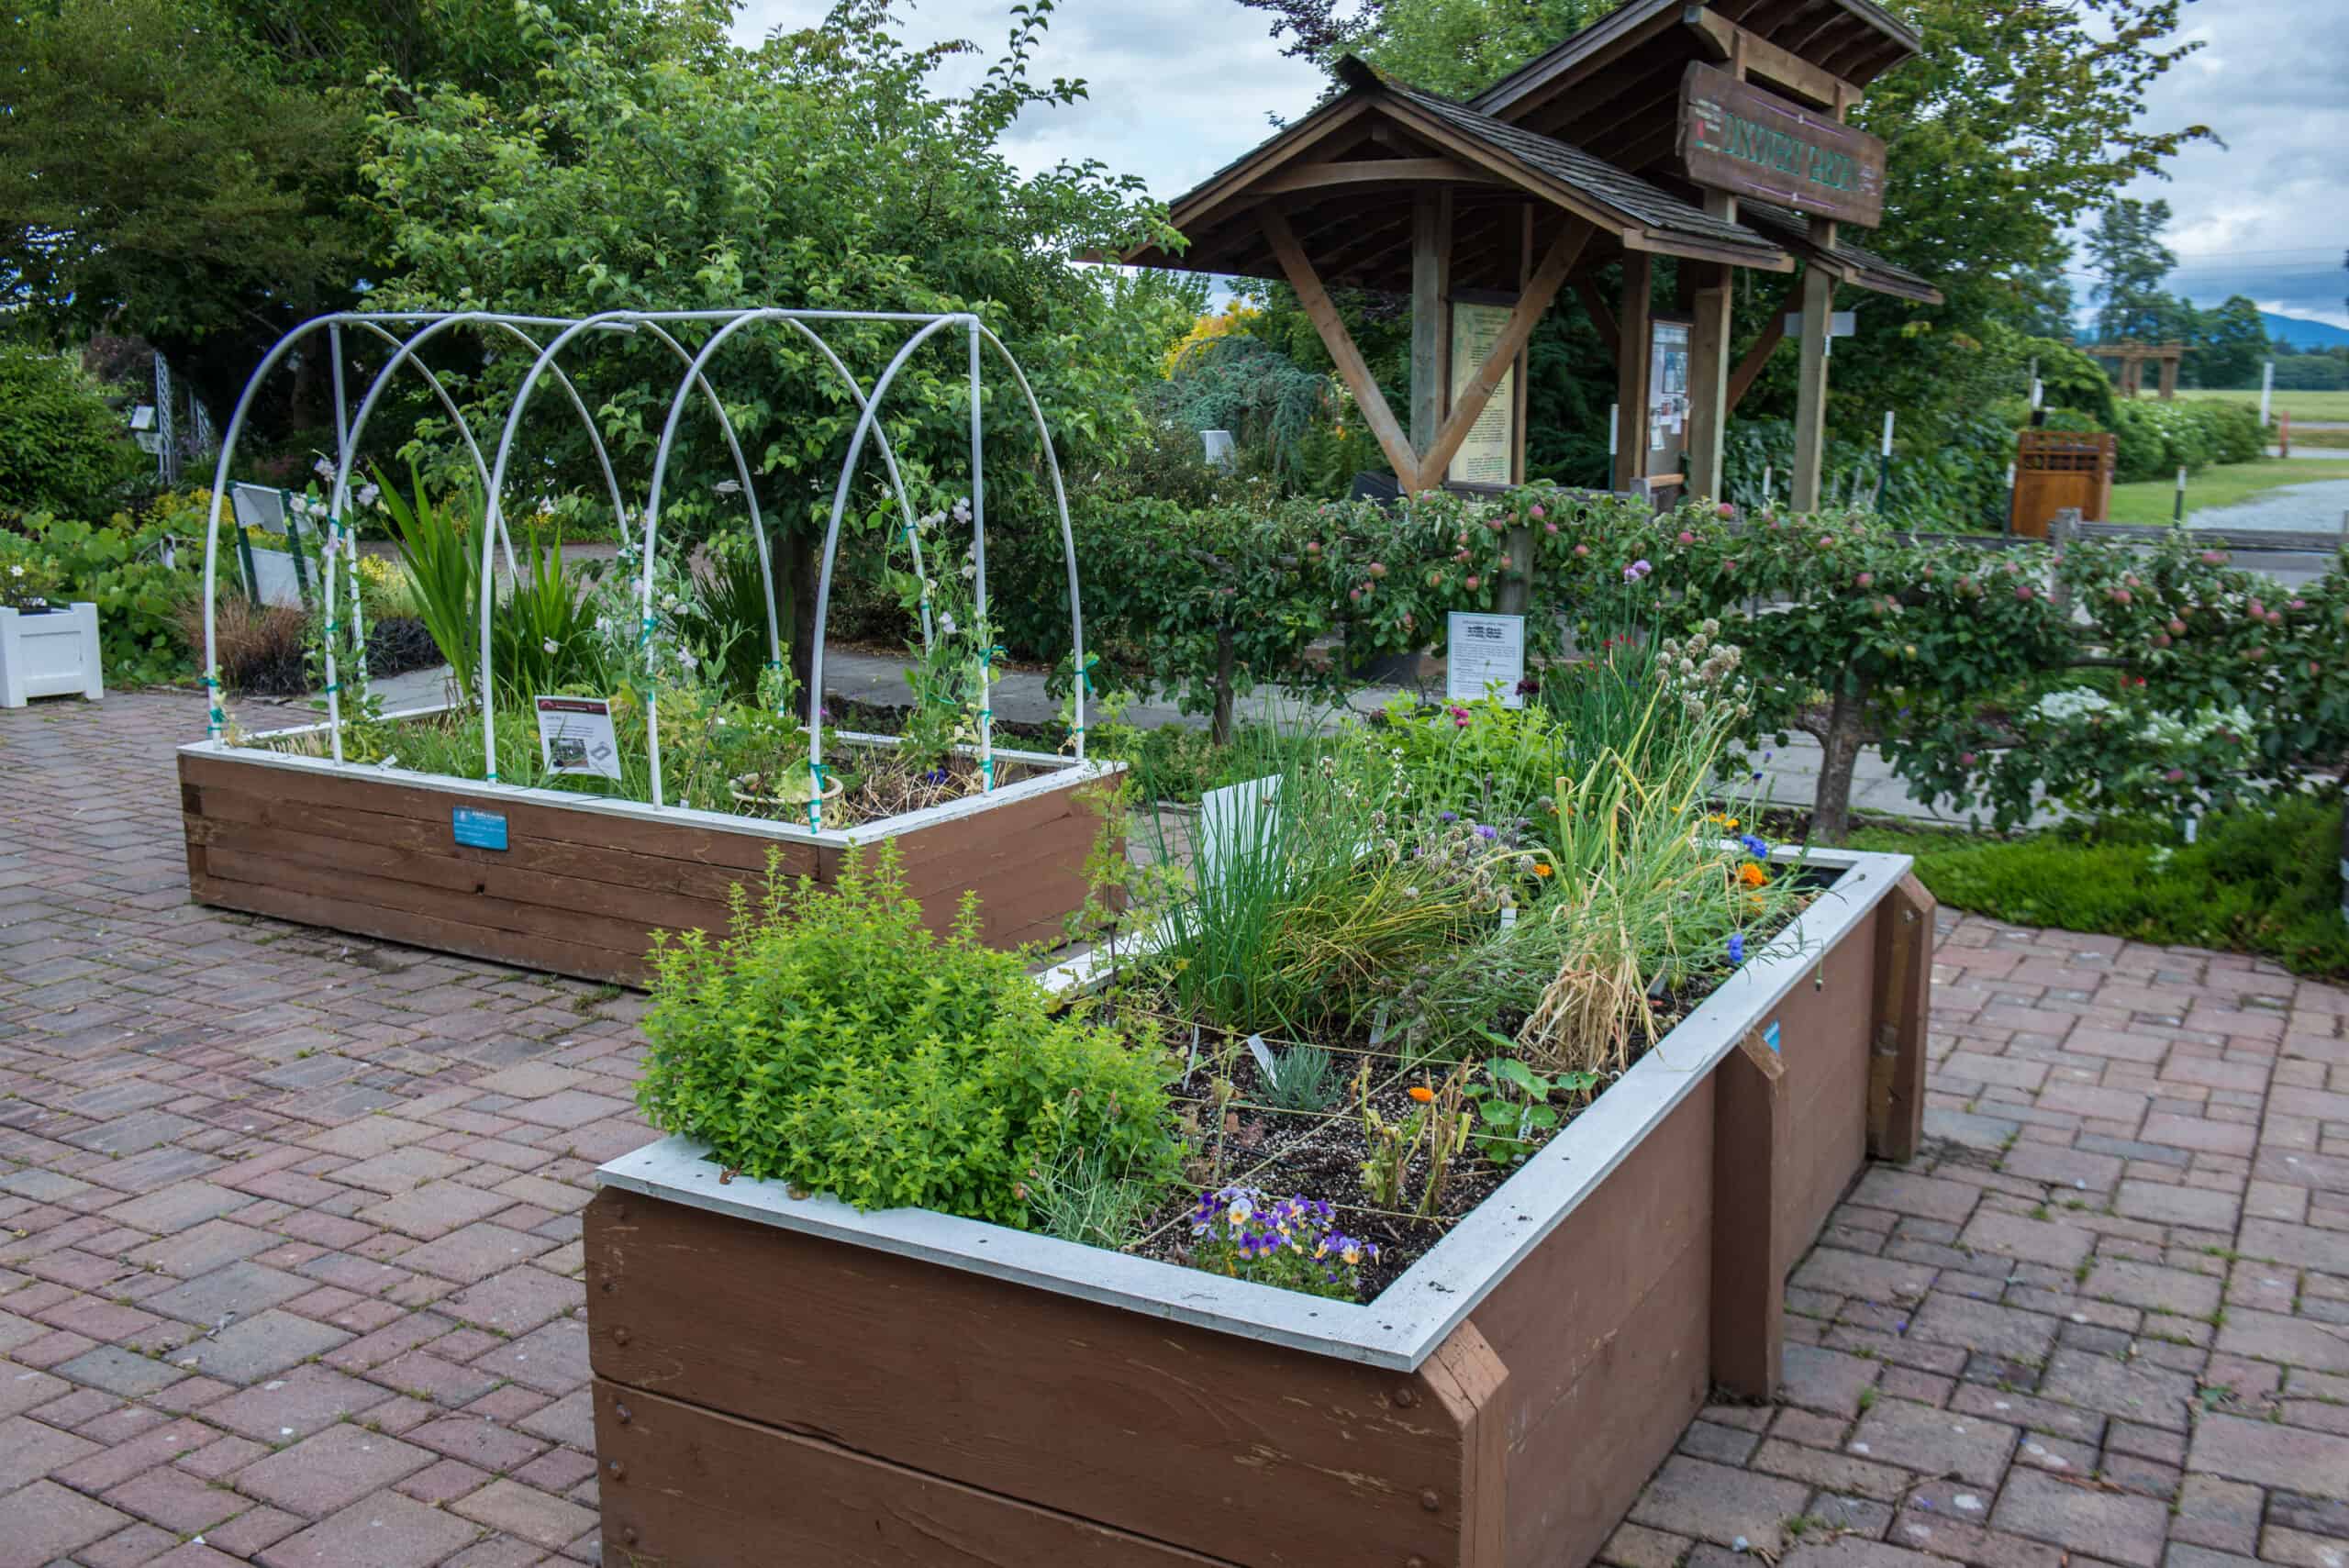 These raised beds in the Discovery Garden show the multiple advantages of raised bed gardening.© Photo by Nancy Crowell / Skagit County WSU Extension Master Gardener